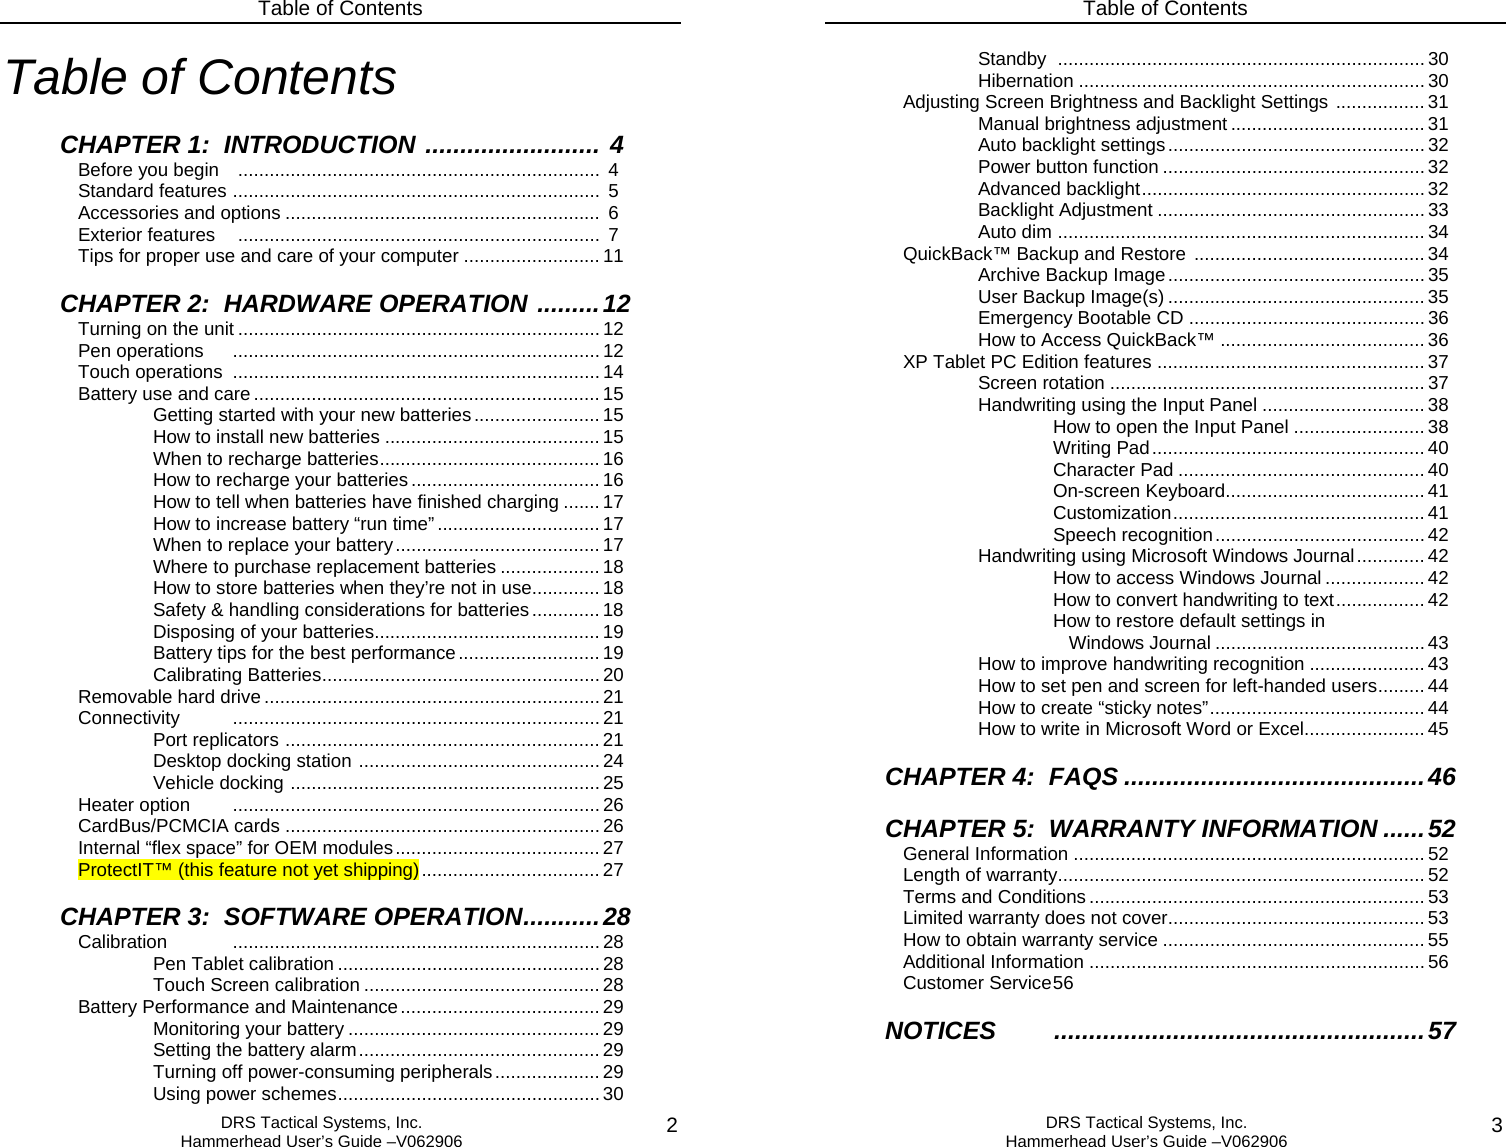 Table of Contents  DRS Tactical Systems, Inc.  Hammerhead User’s Guide –V062906  2Table of Contents  CHAPTER 1:  INTRODUCTION ......................... 4 Before you begin    .....................................................................  4  Standard features ......................................................................  5  Accessories and options ............................................................ 6  Exterior features   .....................................................................  7   Tips for proper use and care of your computer .......................... 11   CHAPTER 2:  HARDWARE OPERATION .........12  Turning on the unit ..................................................................... 12  Pen operations  ...................................................................... 12  Touch operations  ...................................................................... 14  Battery use and care.................................................................. 15     Getting started with your new batteries........................ 15     How to install new batteries .........................................15     When to recharge batteries.......................................... 16     How to recharge your batteries....................................16     How to tell when batteries have finished charging ....... 17     How to increase battery “run time” ............................... 17     When to replace your battery.......................................17     Where to purchase replacement batteries ................... 18     How to store batteries when they’re not in use.............18     Safety &amp; handling considerations for batteries............. 18     Disposing of your batteries...........................................19     Battery tips for the best performance........................... 19    Calibrating Batteries..................................................... 20  Removable hard drive ................................................................ 21 Connectivity   ...................................................................... 21    Port replicators ............................................................ 21    Desktop docking station .............................................. 24    Vehicle docking ........................................................... 25  Heater option  ...................................................................... 26  CardBus/PCMCIA cards ............................................................26   Internal “flex space” for OEM modules.......................................27   ProtectIT™ (this feature not yet shipping).................................. 27  CHAPTER 3:  SOFTWARE OPERATION...........28  Calibration ......................................................................28   Pen Tablet calibration .................................................. 28   Touch Screen calibration ............................................. 28  Battery Performance and Maintenance...................................... 29   Monitoring your battery ................................................ 29   Setting the battery alarm.............................................. 29   Turning off power-consuming peripherals.................... 29   Using power schemes.................................................. 30 Table of Contents  DRS Tactical Systems, Inc.  Hammerhead User’s Guide –V062906  3   Standby ......................................................................30   Hibernation ..................................................................30   Adjusting Screen Brightness and Backlight Settings ................. 31   Manual brightness adjustment ..................................... 31   Auto backlight settings................................................. 32   Power button function .................................................. 32   Advanced backlight...................................................... 32   Backlight Adjustment ................................................... 33   Auto dim ...................................................................... 34  QuickBack™ Backup and Restore  ............................................ 34   Archive Backup Image ................................................. 35   User Backup Image(s) ................................................. 35   Emergency Bootable CD ............................................. 36   How to Access QuickBack™ ....................................... 36   XP Tablet PC Edition features ................................................... 37   Screen rotation ............................................................ 37   Handwriting using the Input Panel ............................... 38    How to open the Input Panel ......................... 38    Writing Pad.................................................... 40    Character Pad ............................................... 40    On-screen Keyboard...................................... 41    Customization................................................ 41    Speech recognition........................................ 42   Handwriting using Microsoft Windows Journal............. 42    How to access Windows Journal ................... 42    How to convert handwriting to text................. 42       How to restore default settings in       Windows Journal ........................................ 43     How to improve handwriting recognition ...................... 43     How to set pen and screen for left-handed users......... 44   How to create “sticky notes”......................................... 44     How to write in Microsoft Word or Excel.......................45    CHAPTER 4:  FAQS ...........................................46  CHAPTER 5:  WARRANTY INFORMATION ......52  General Information ................................................................... 52    Length of warranty...................................................................... 52   Terms and Conditions ................................................................ 53  Limited warranty does not cover................................................. 53   How to obtain warranty service .................................................. 55  Additional Information ................................................................ 56  Customer Service 56  NOTICES .....................................................57